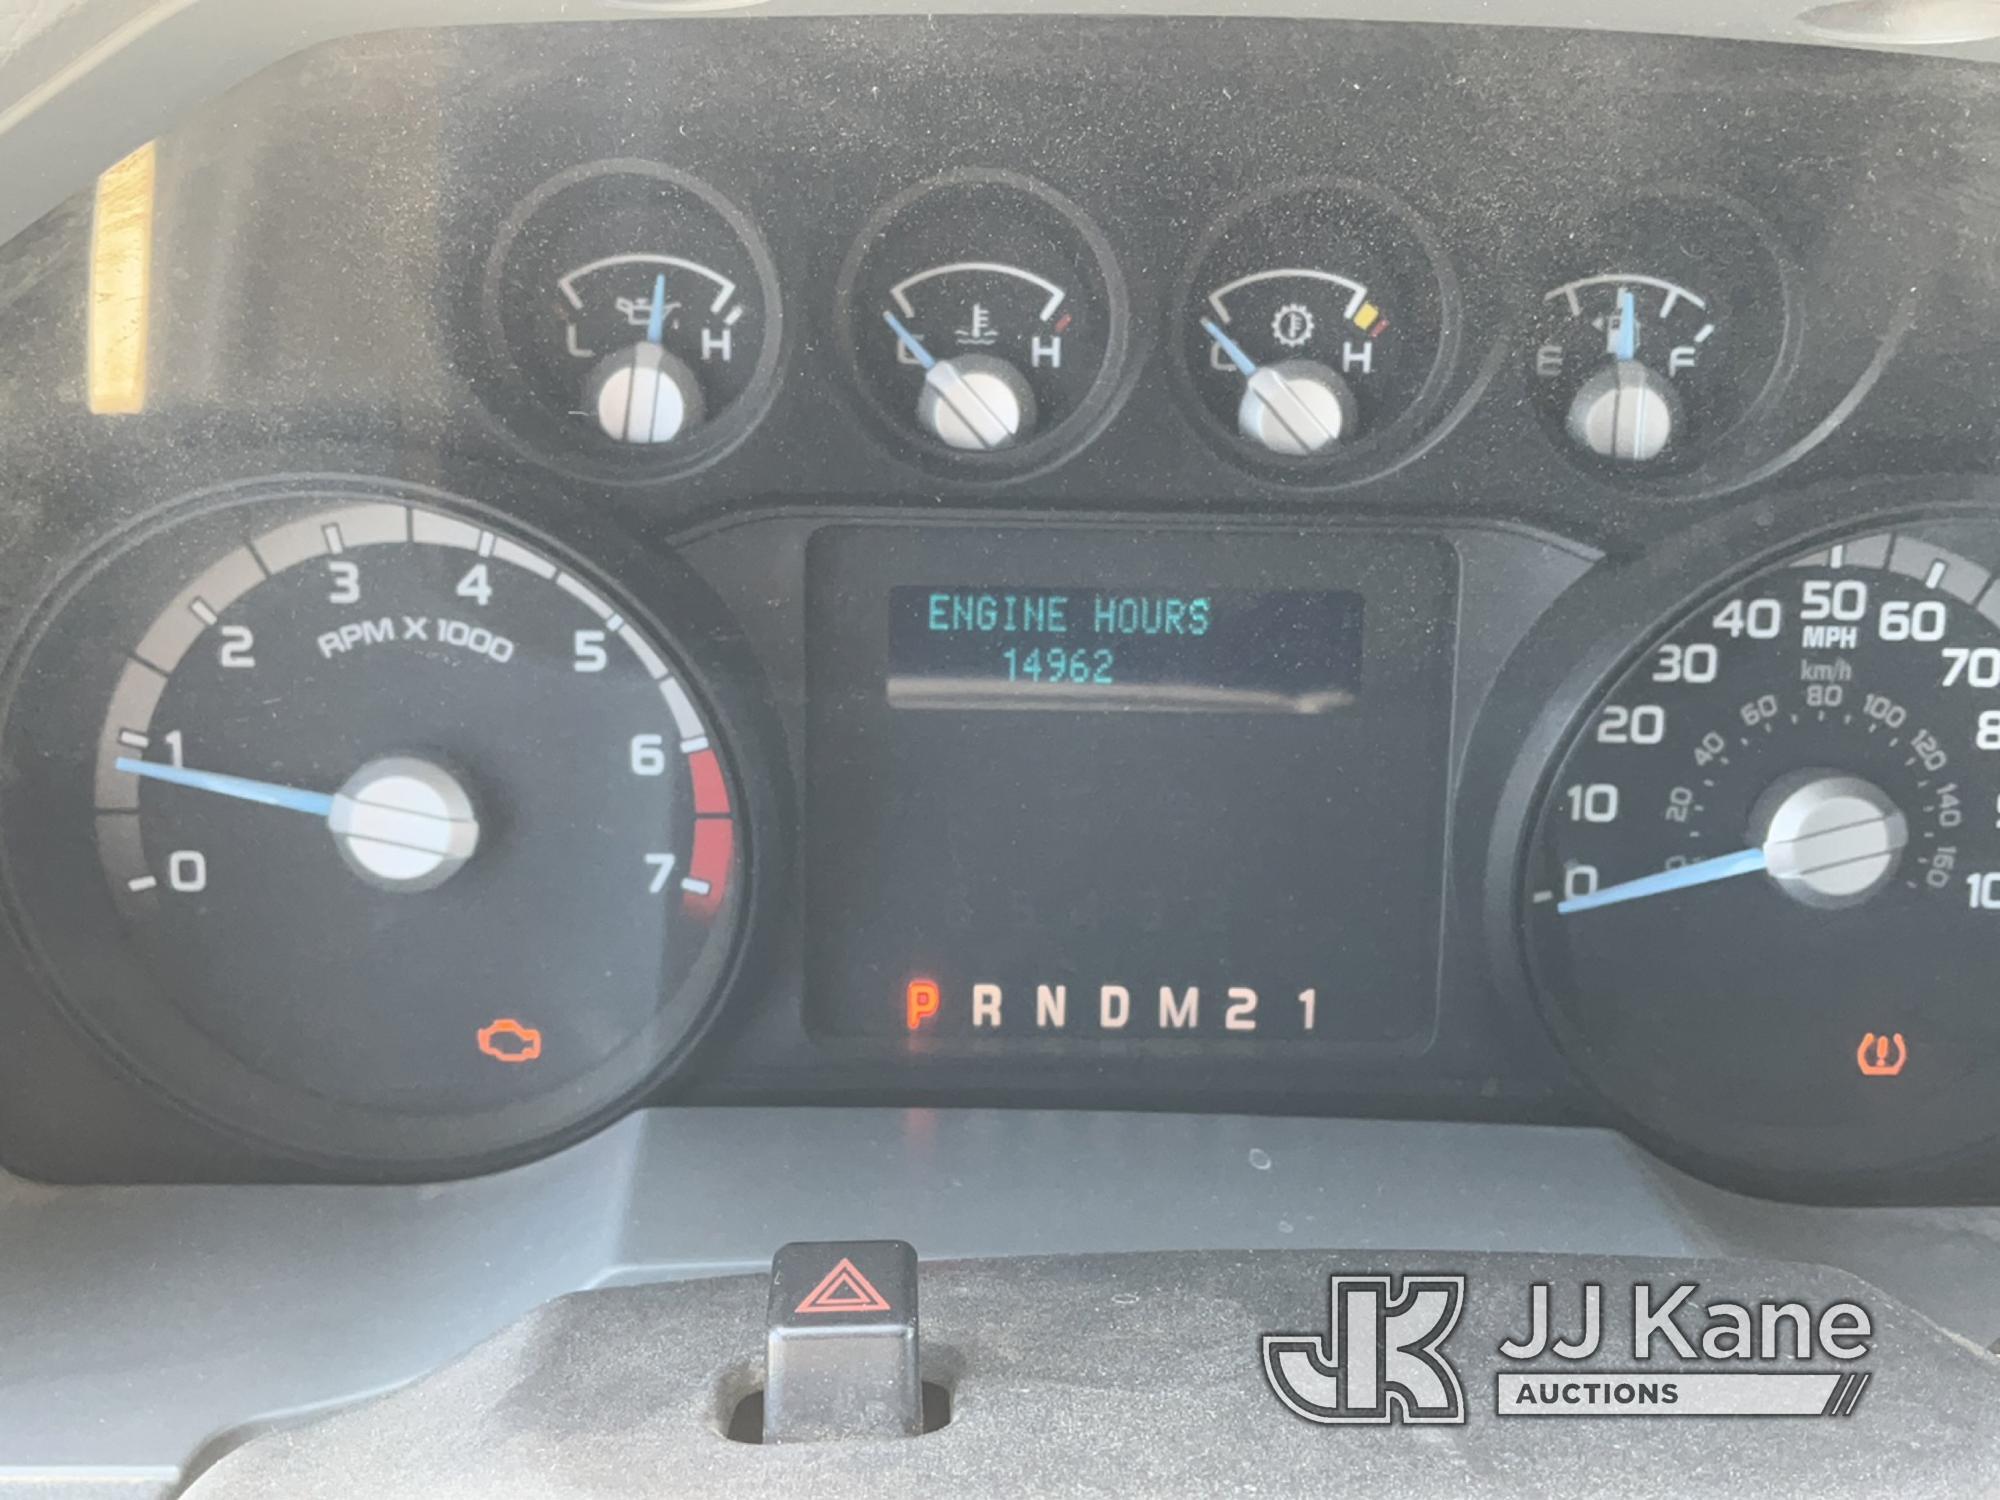 (South Beloit, IL) 2013 Ford F250 4x4 Extended-Cab Pickup Truck Runs & Moves) (Check Engine Light On